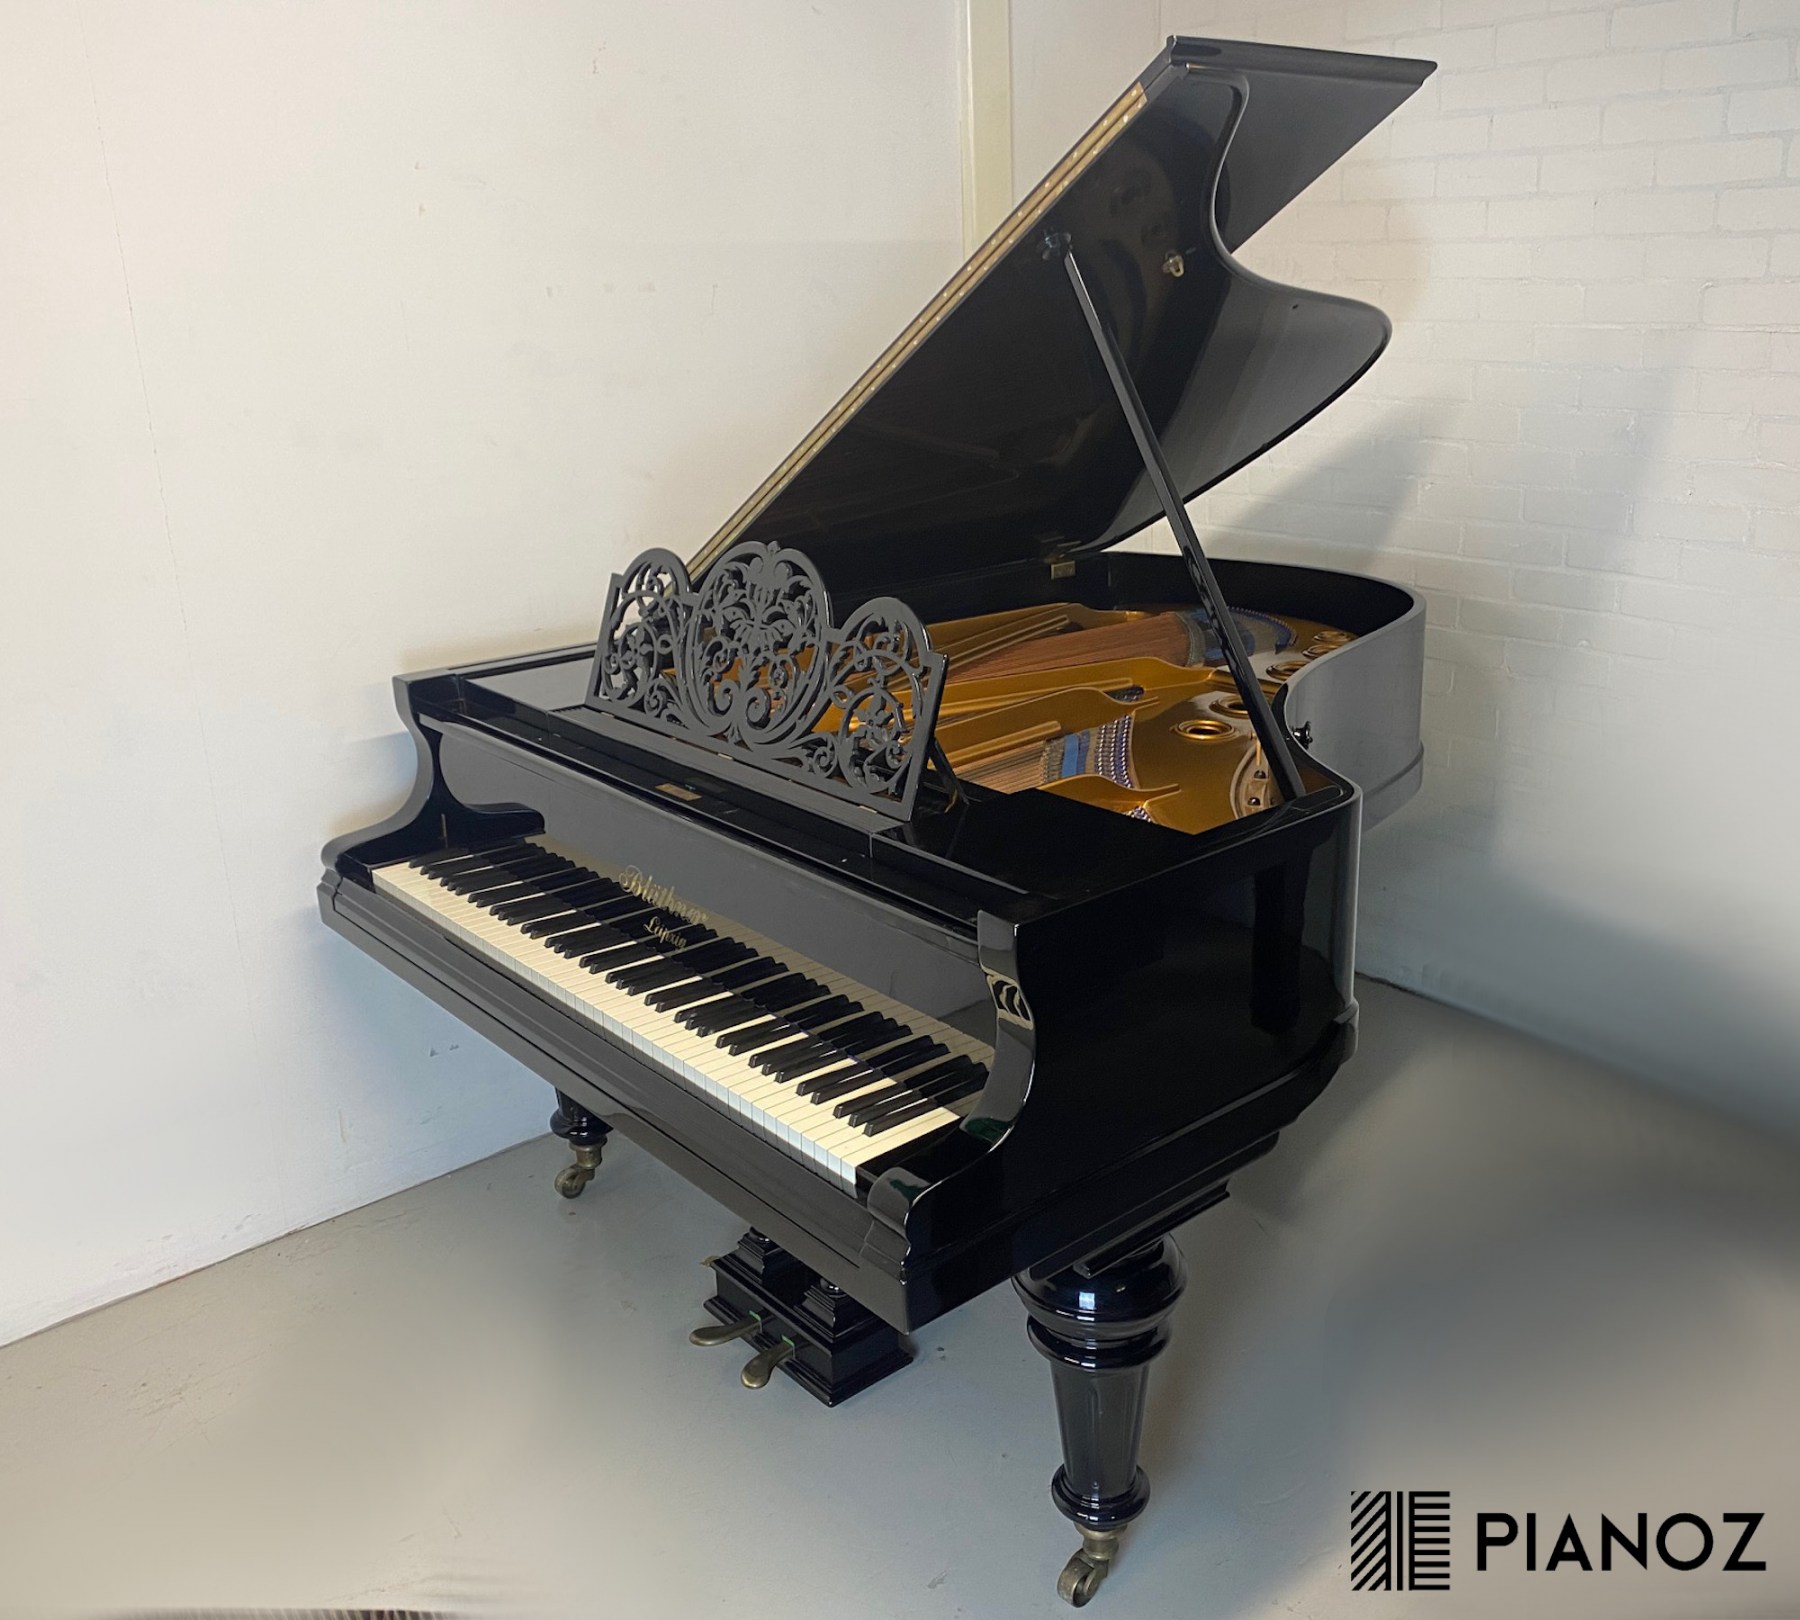 Bluthner  Fully Restored Grand Piano piano for sale in UK